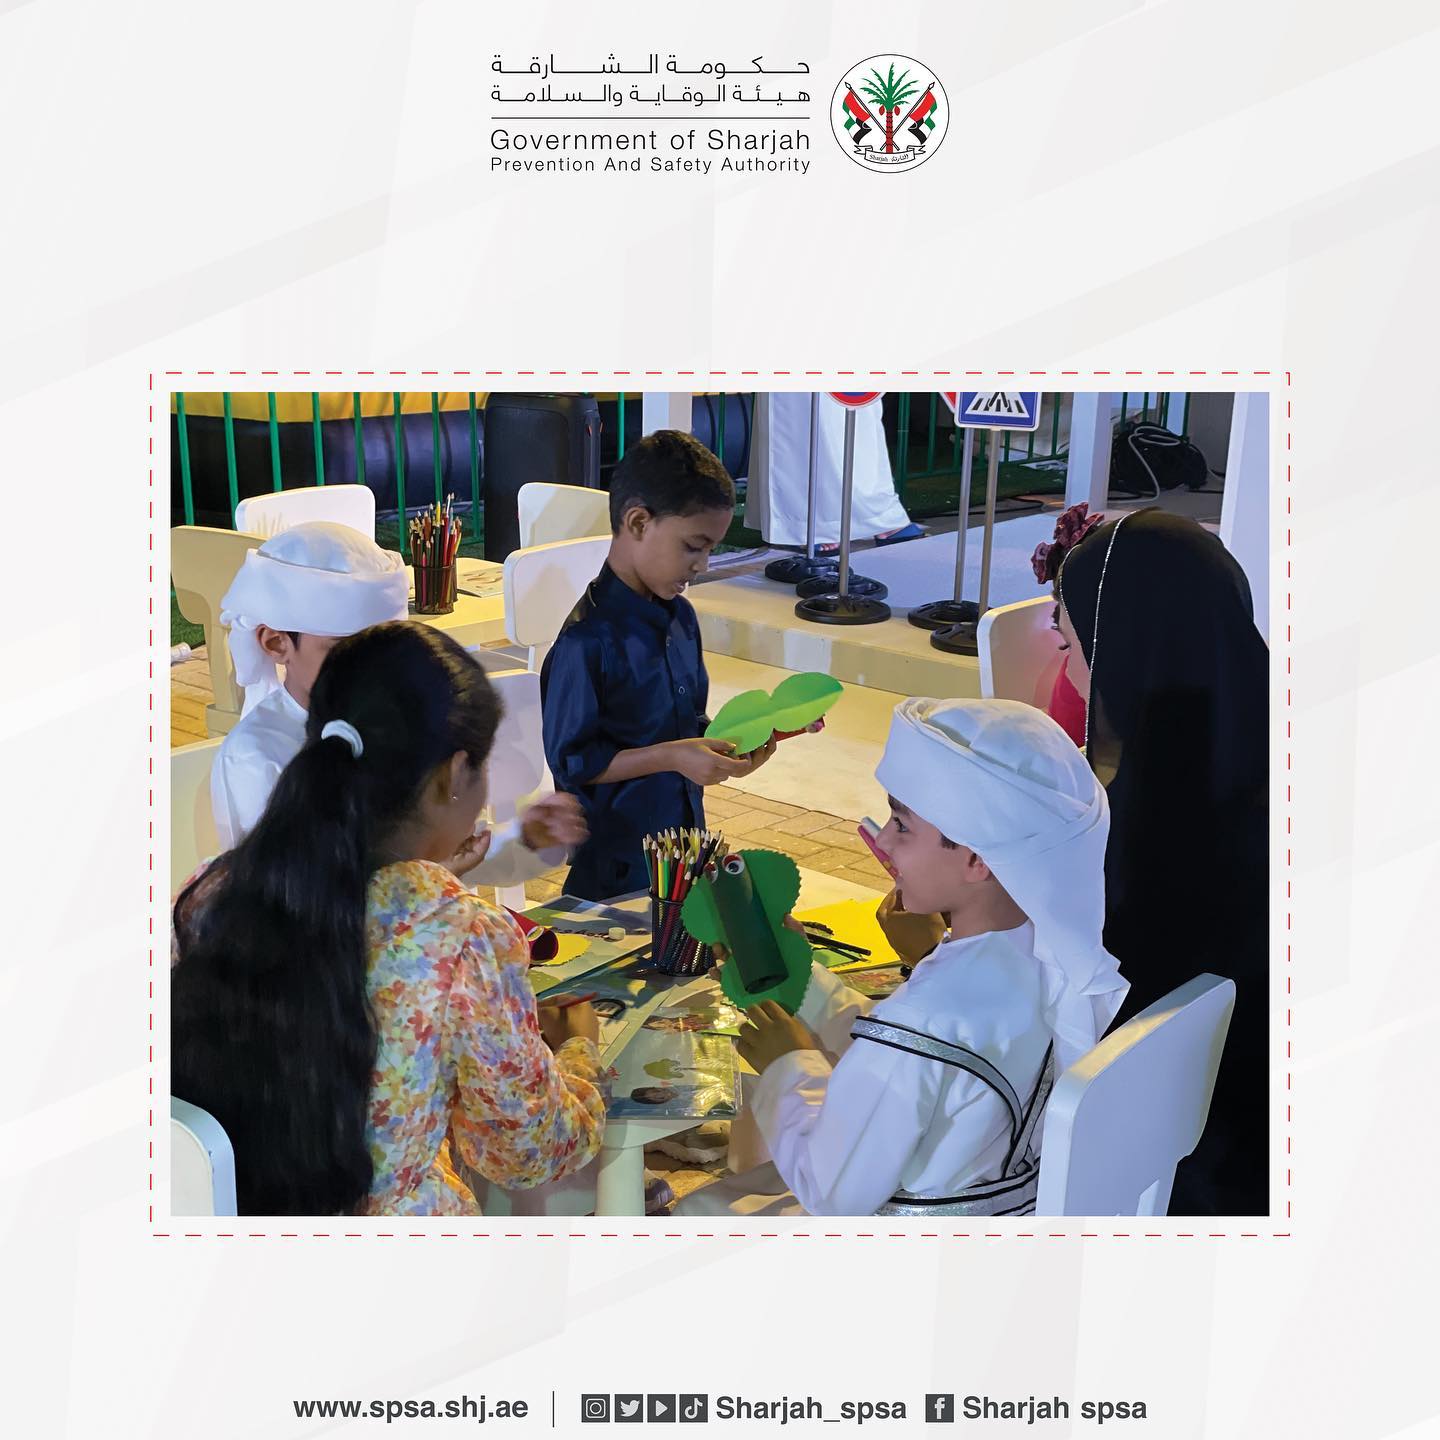 Participation of the Prevention and Safety Authority in Sharjah Heritage Days